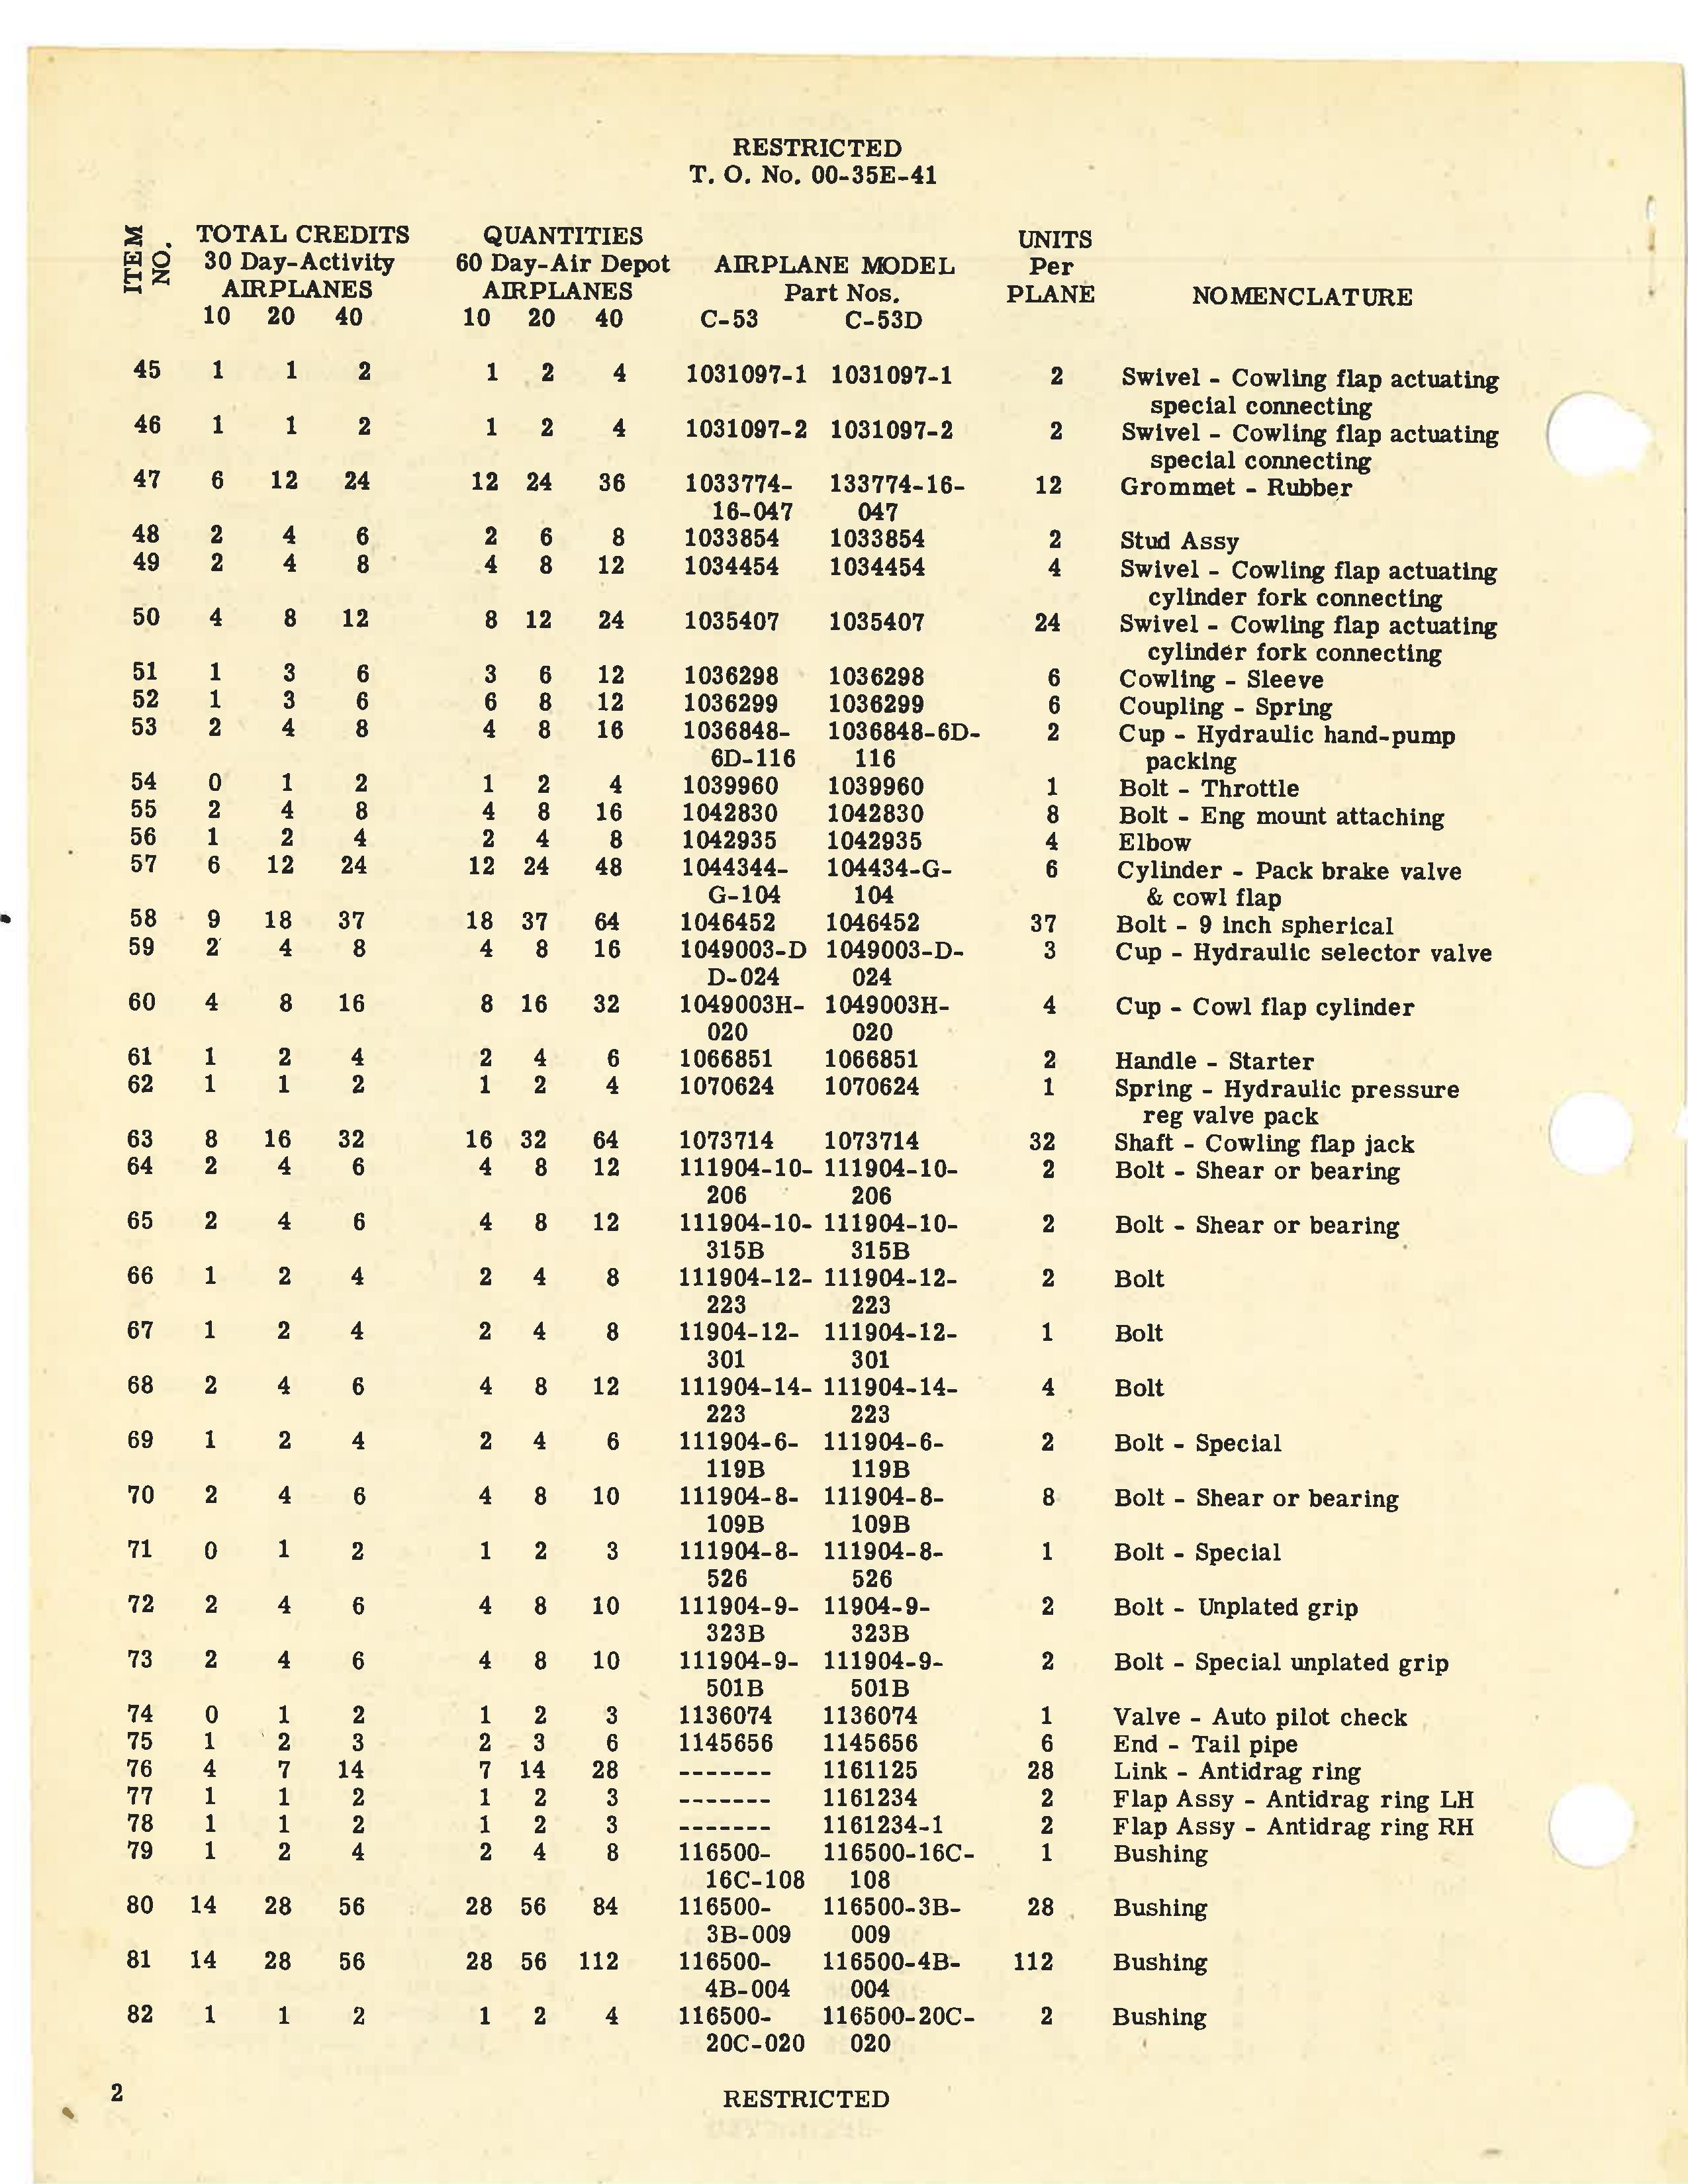 Sample page 4 from AirCorps Library document: Table of Credit Aircraft Maintenance Parts for C-53 and C-53D